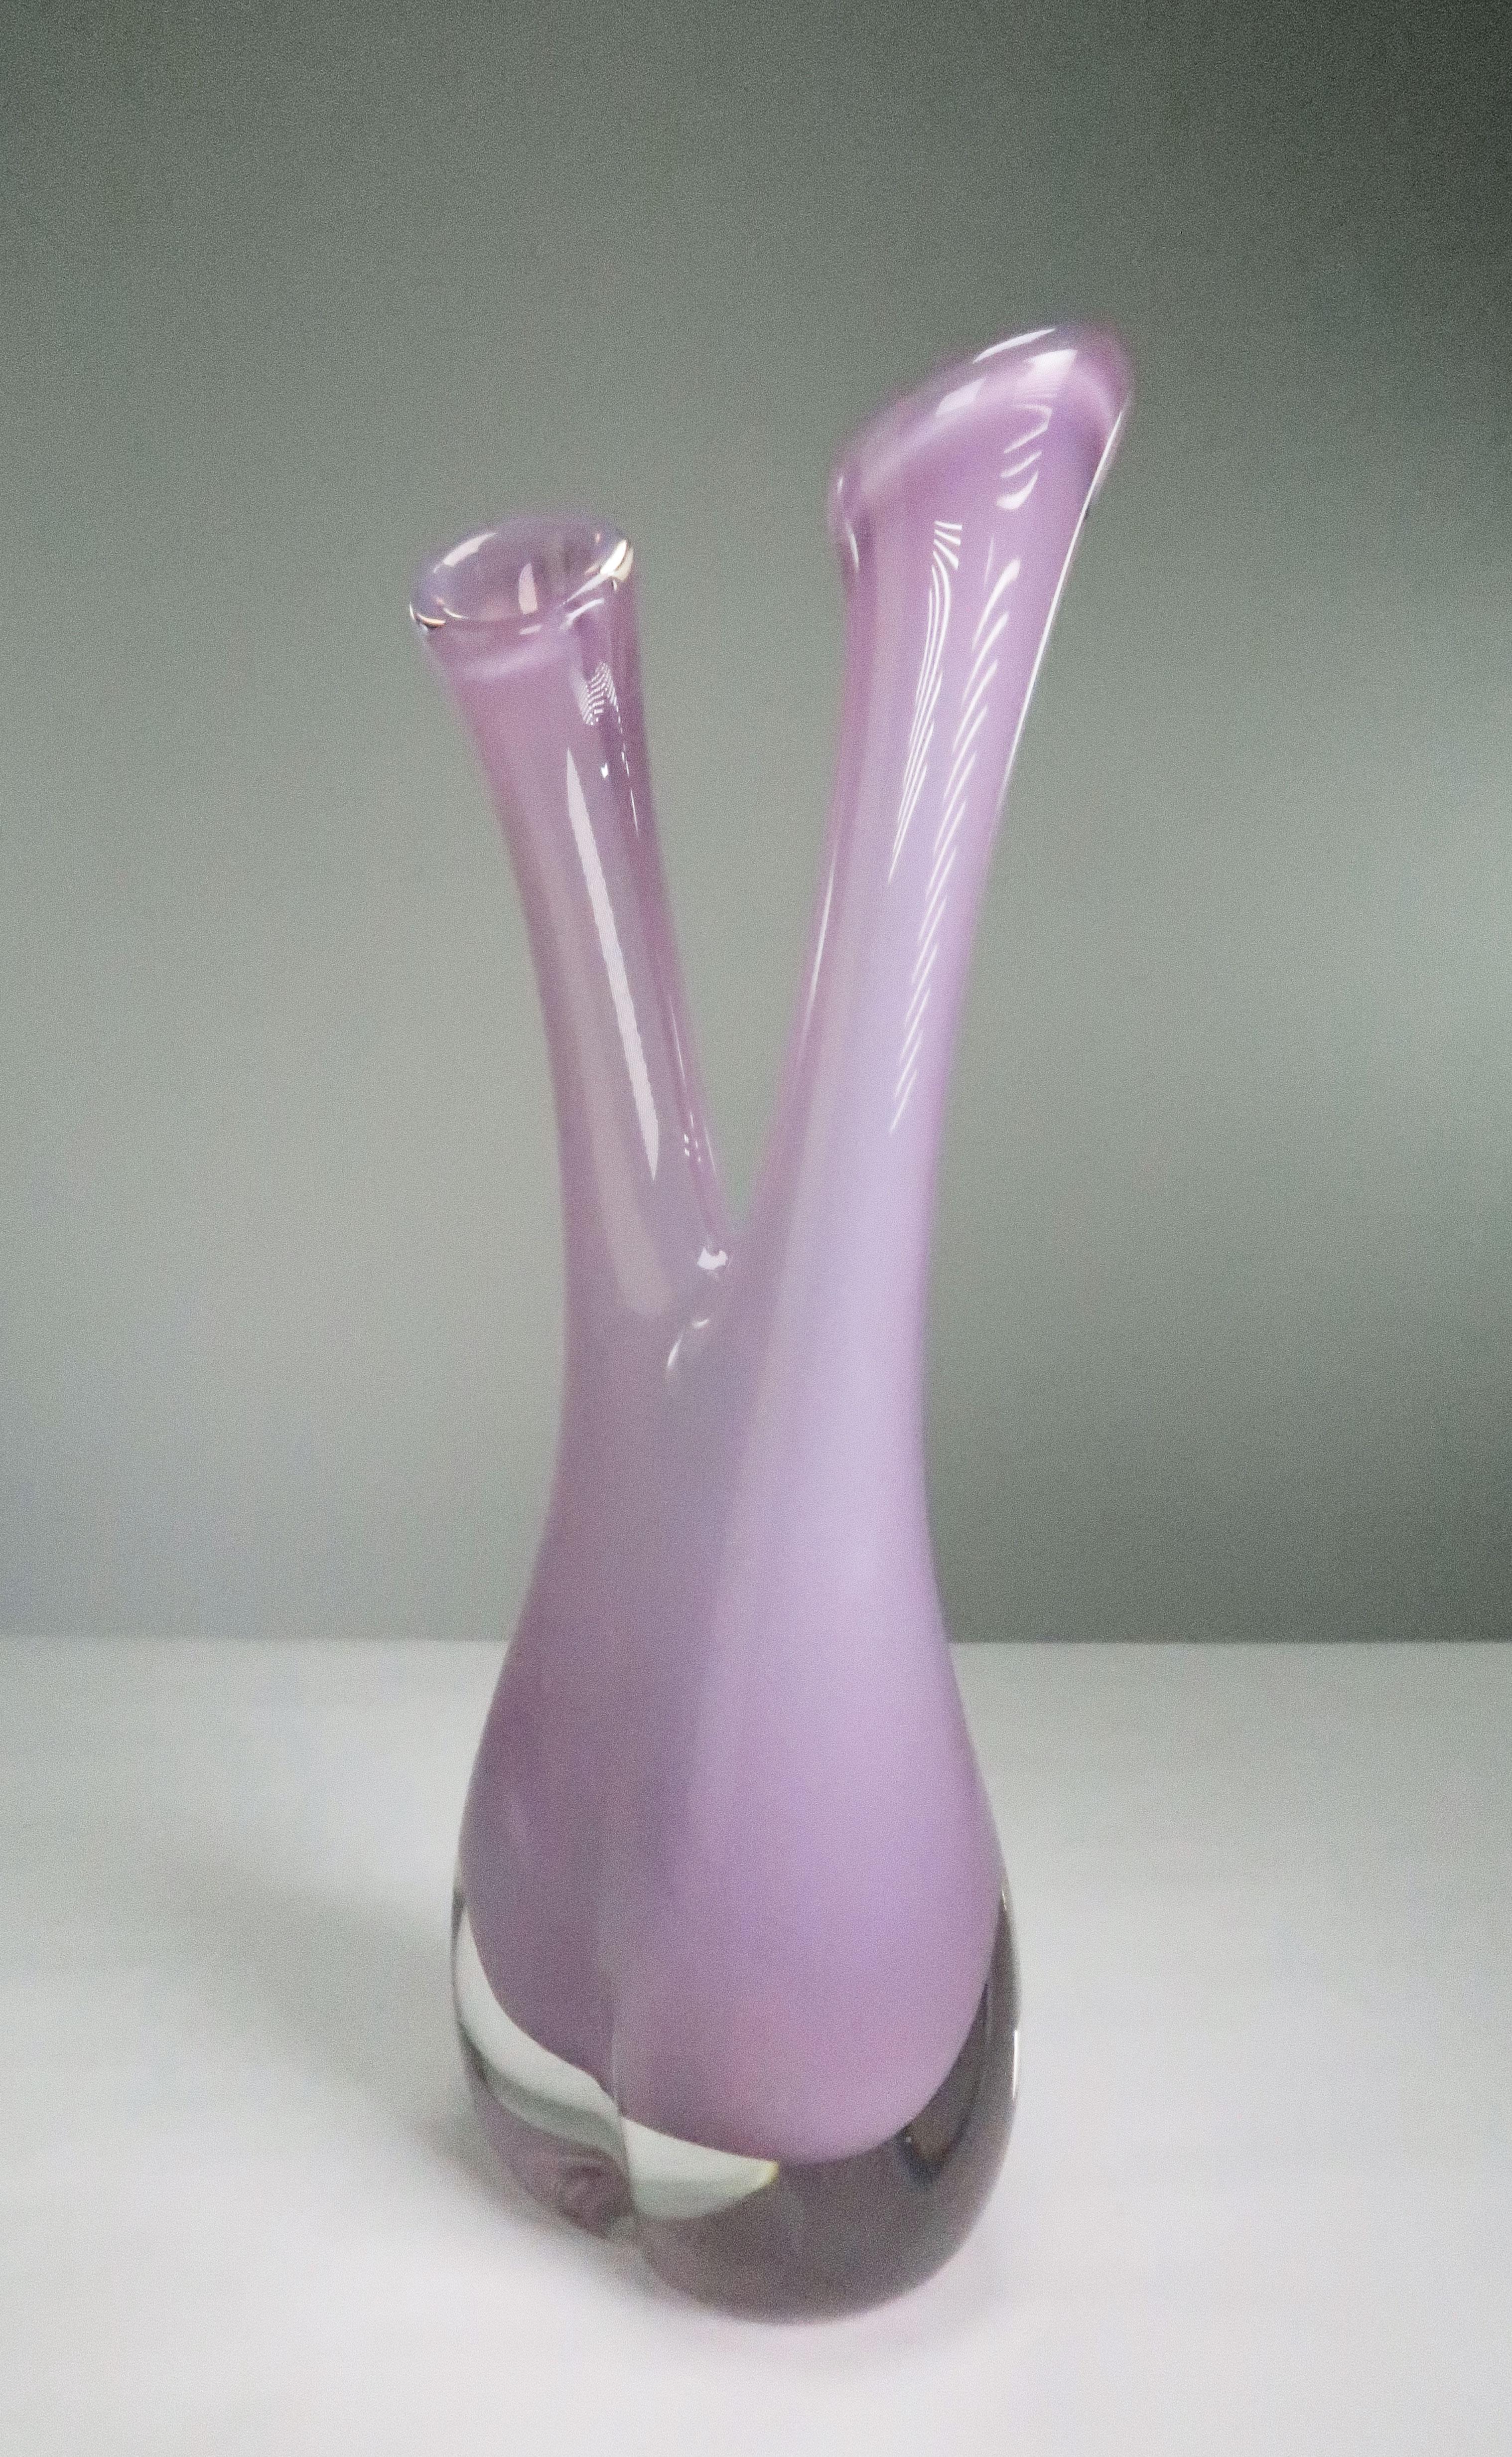 Delicate, stunning Swedish Mid-Century Modern mouth blown art glass vase with two necks and a thick solid rounded base. Light rose, orchid pink colored glass encased in clear glass. Created and manufactured at Swedish Sea Glasbruk in Kosta in the